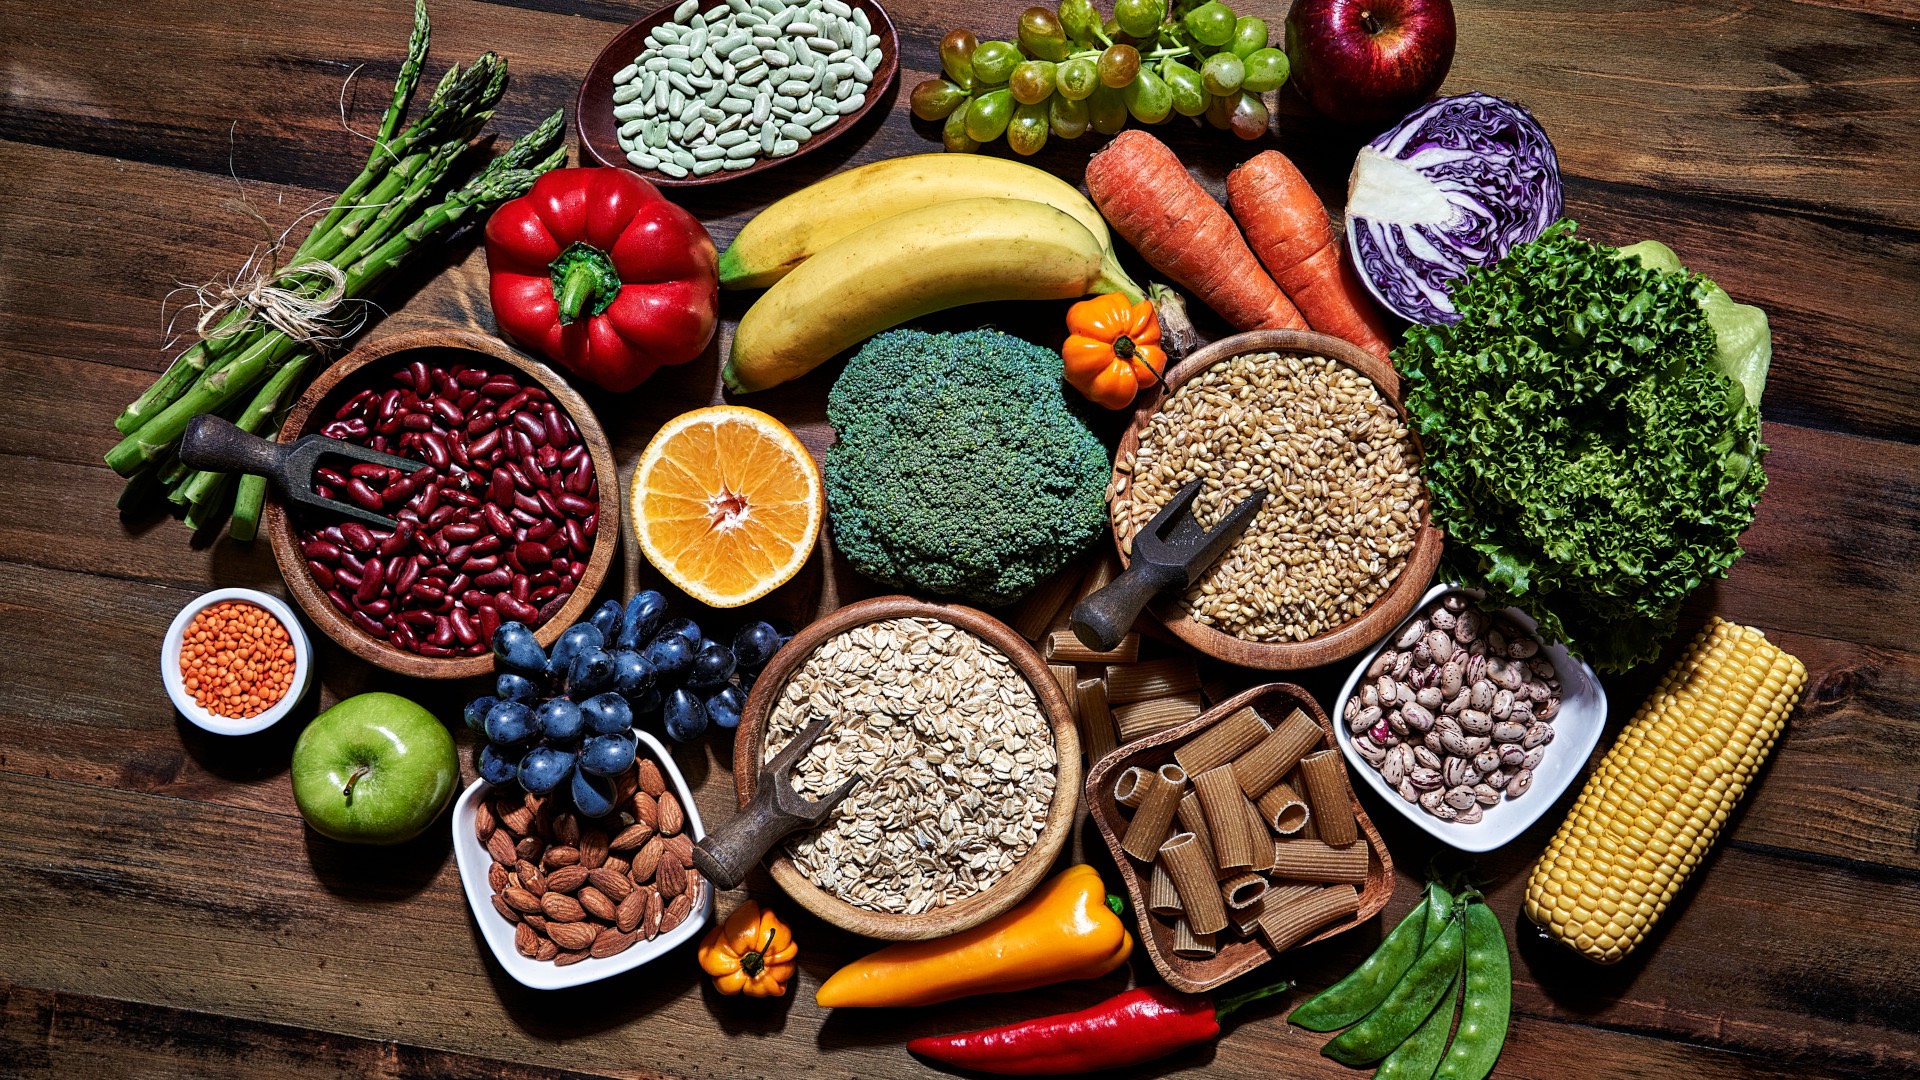 beans, fruits, vegetables, whole grains, and seeds